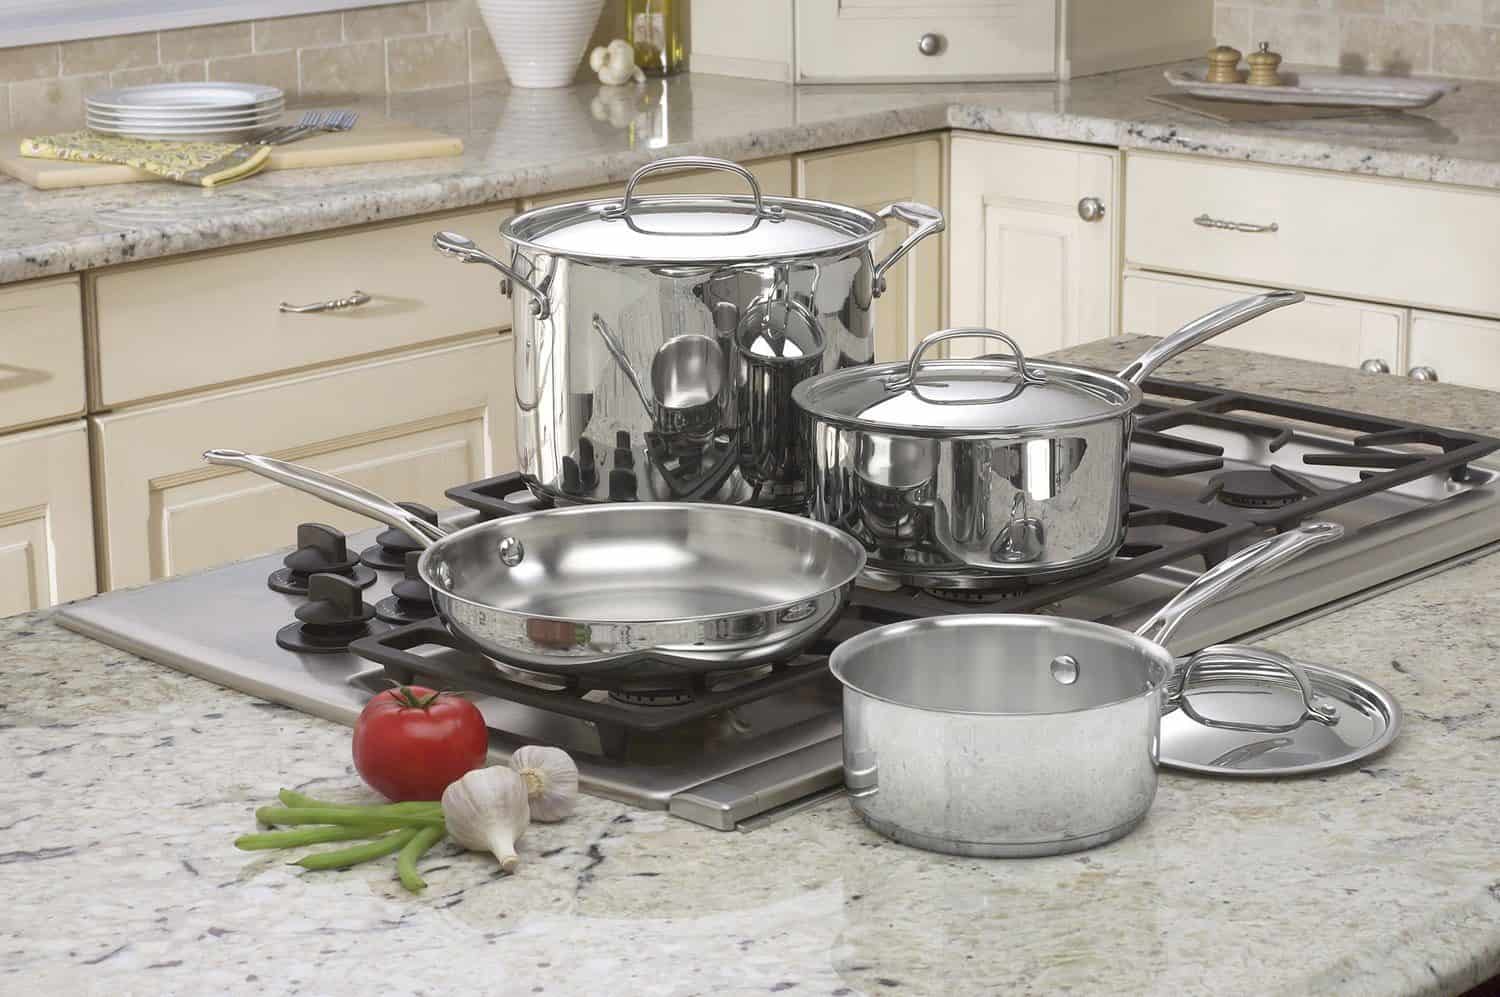 how the cuisinart cookware looks on a gas cooktop in a modern kitchen